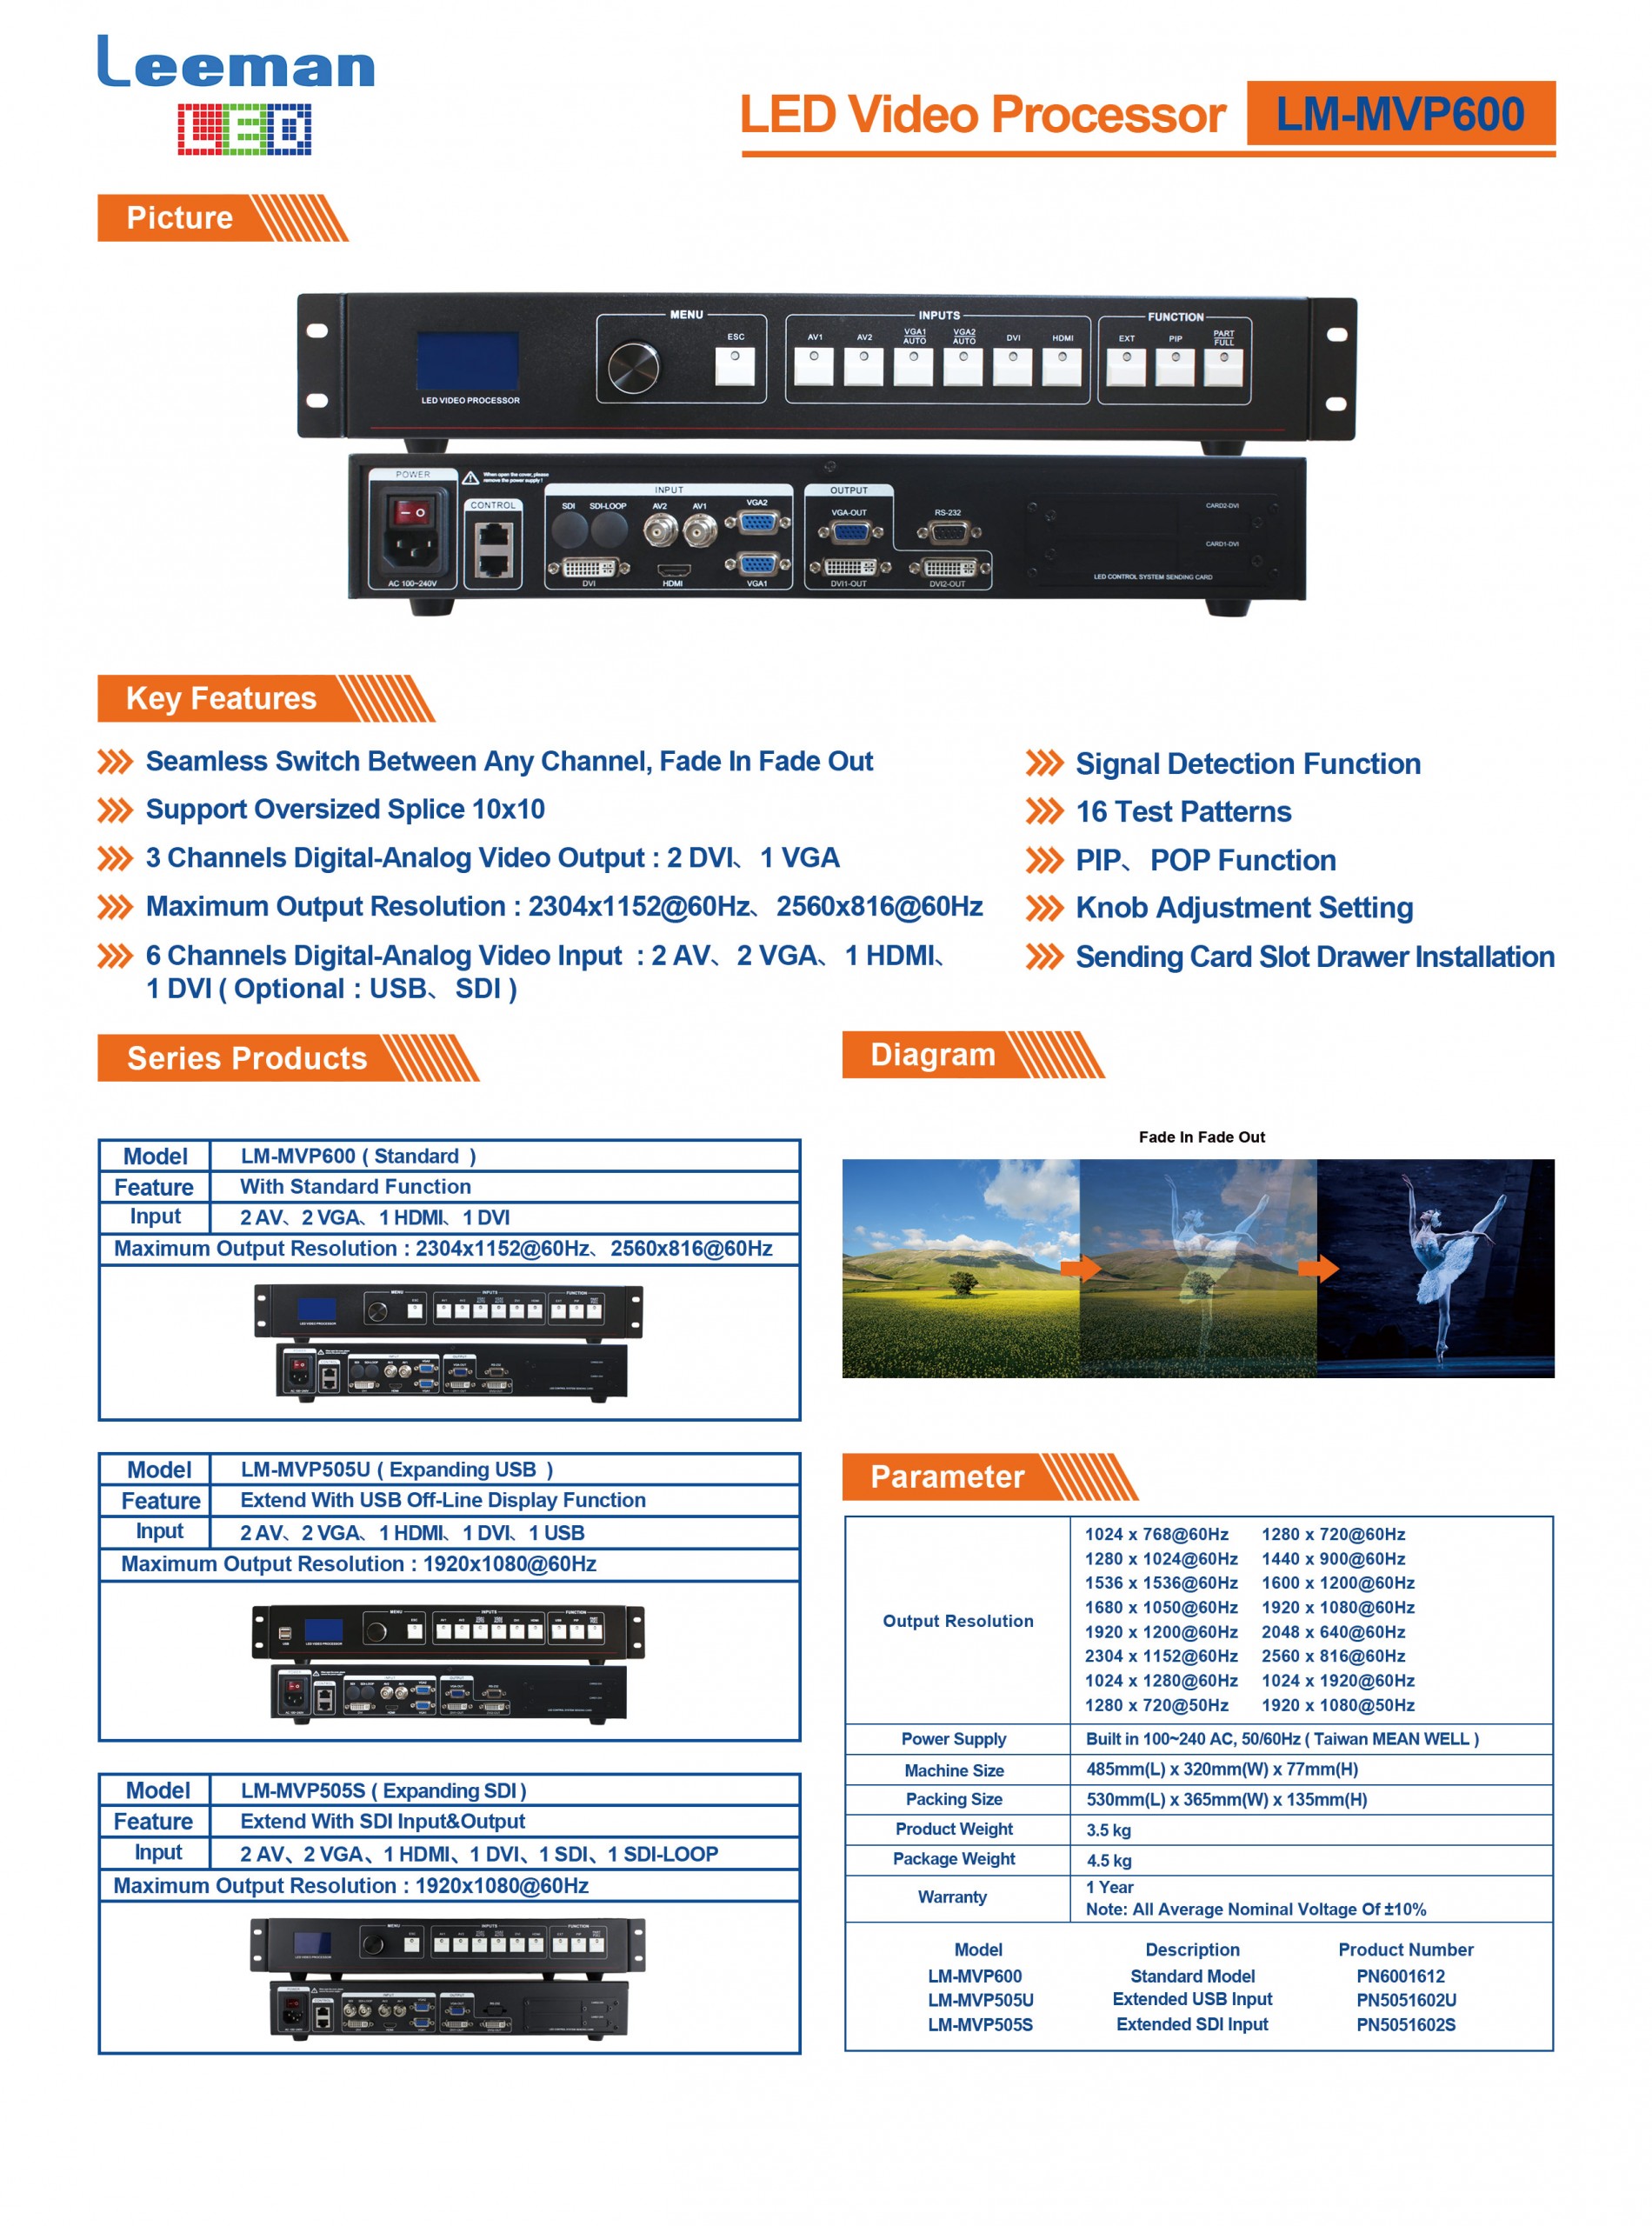 NovaPro UHD Jr All-in-one Professional 4K LED Video Screen Controller